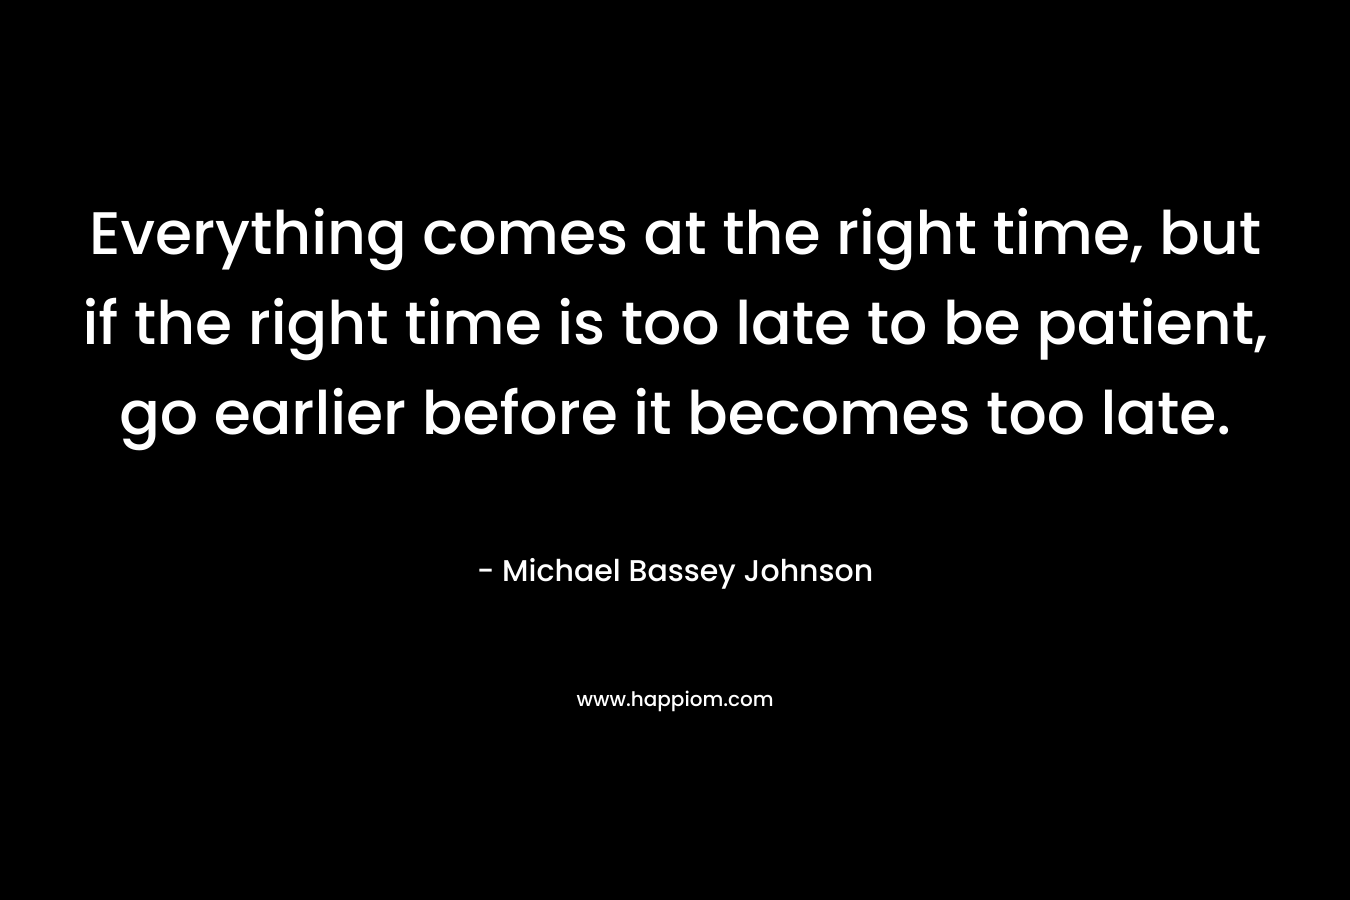 Everything comes at the right time, but if the right time is too late to be patient, go earlier before it becomes too late. – Michael Bassey Johnson